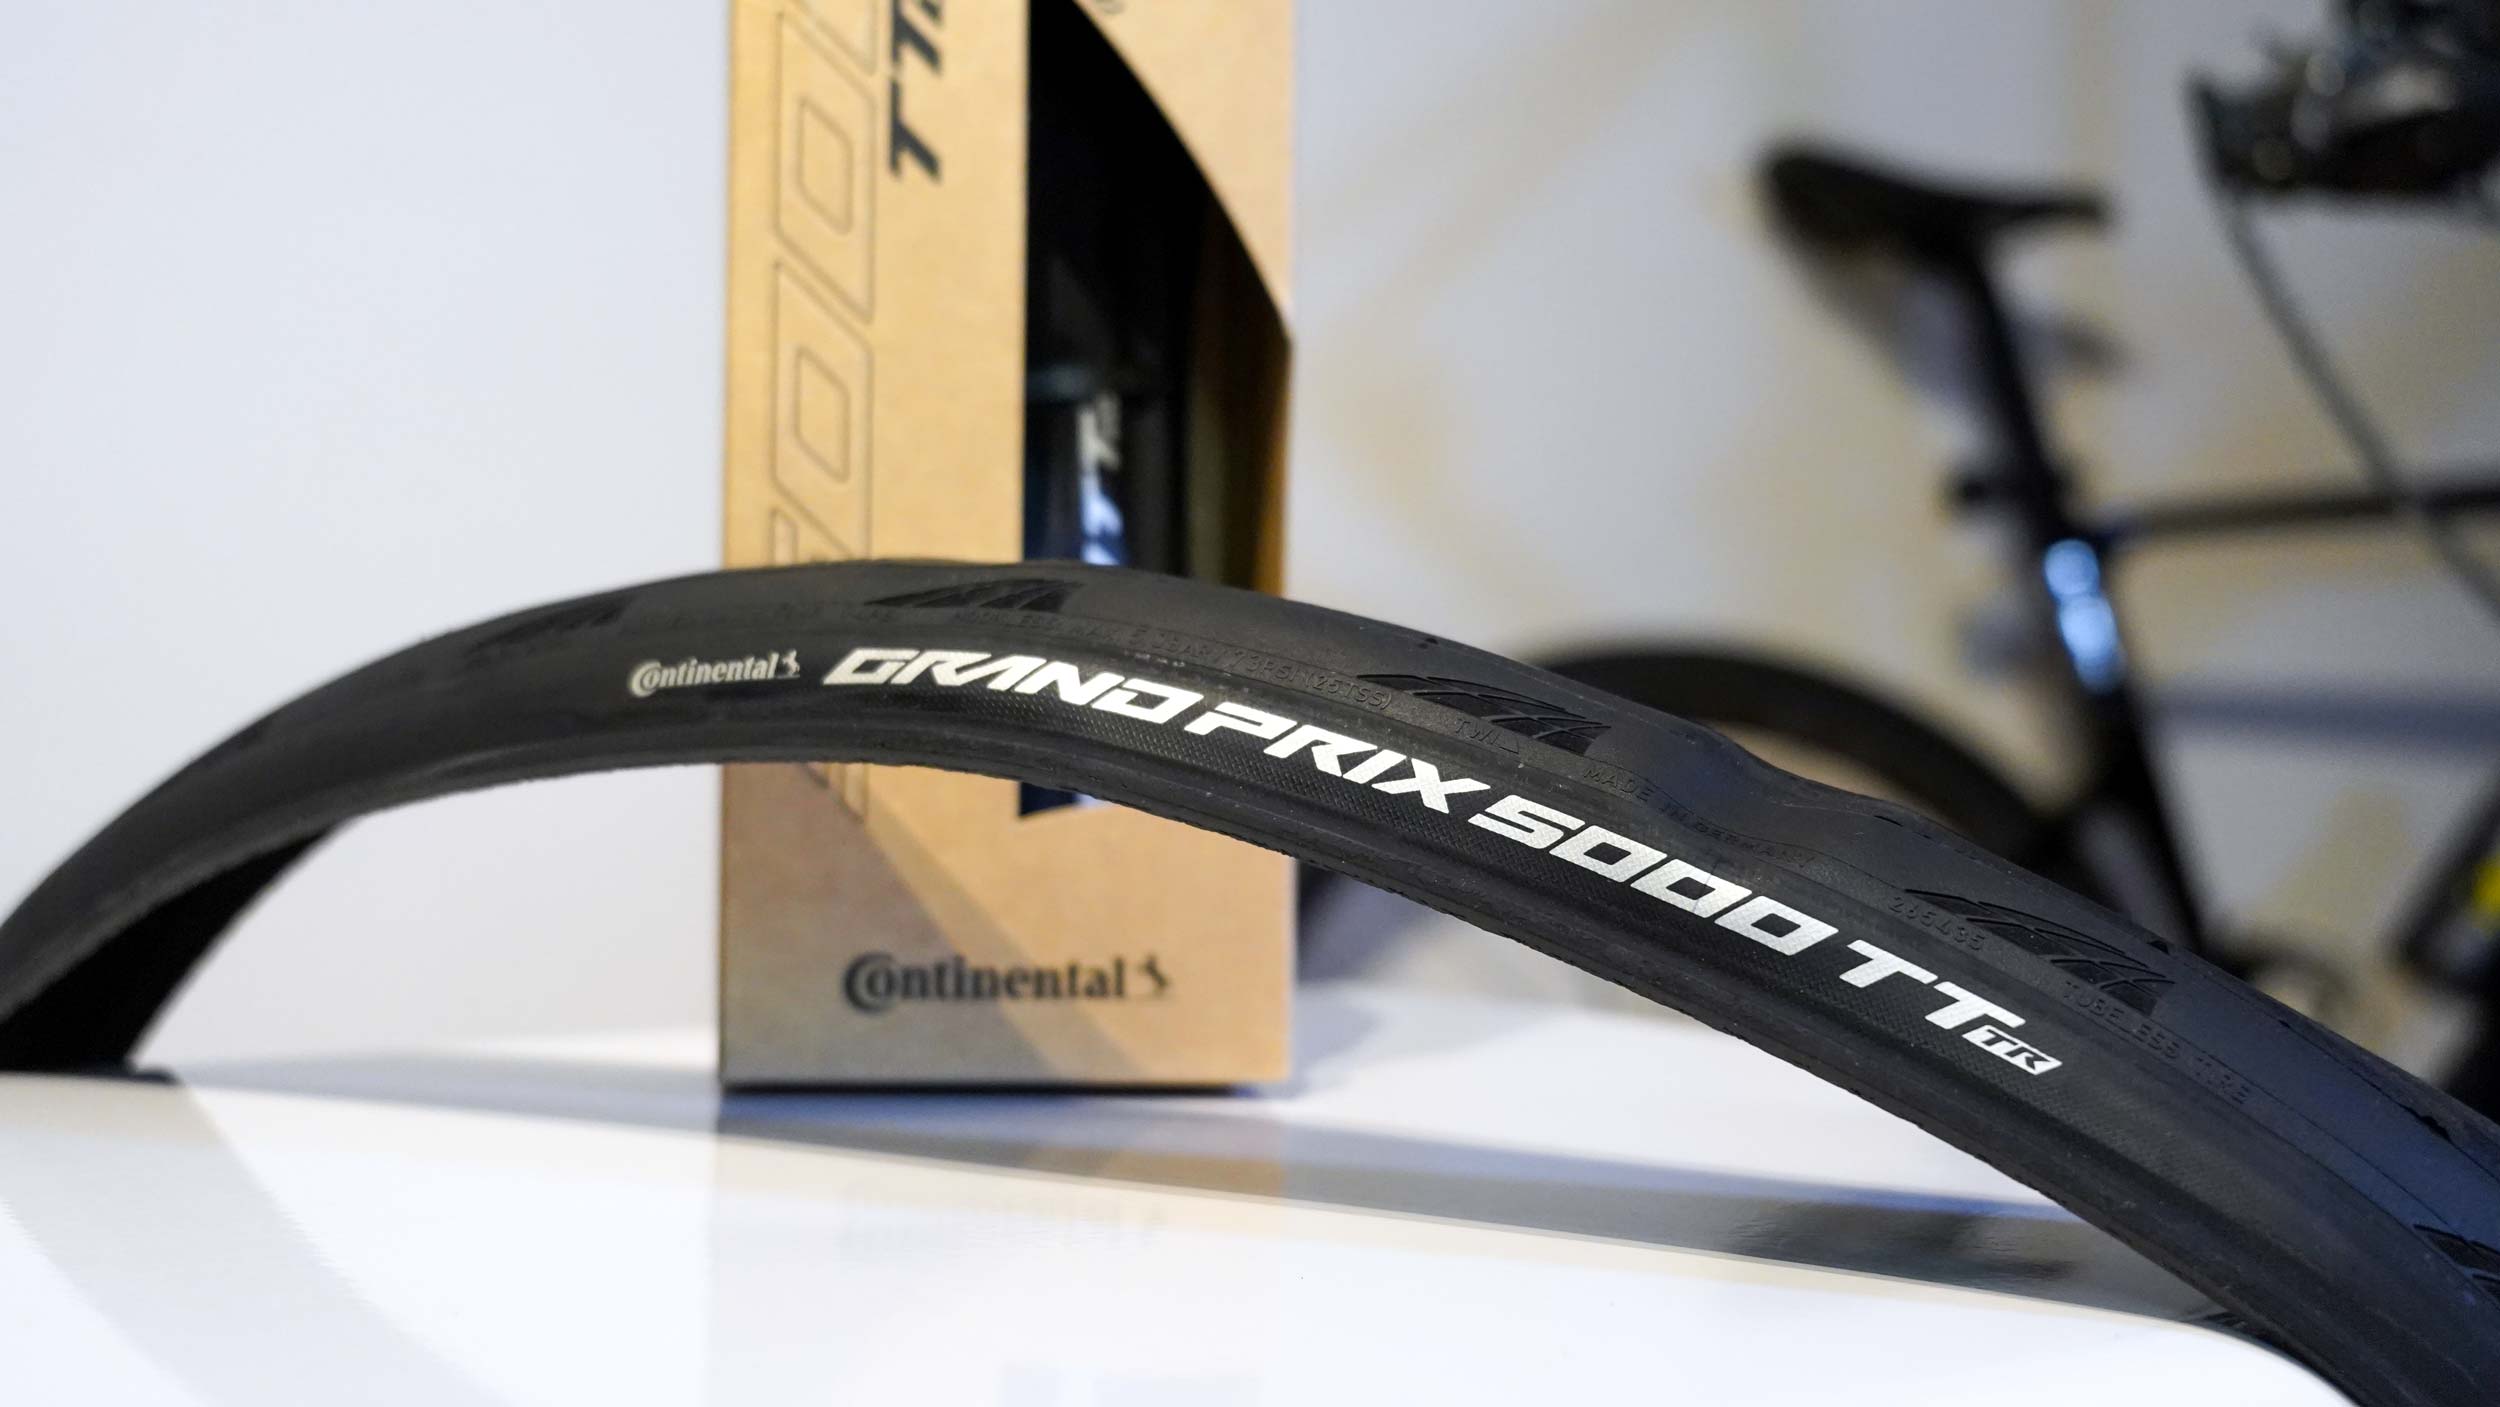 Review: Continental Grand Prix 5000 AS TR